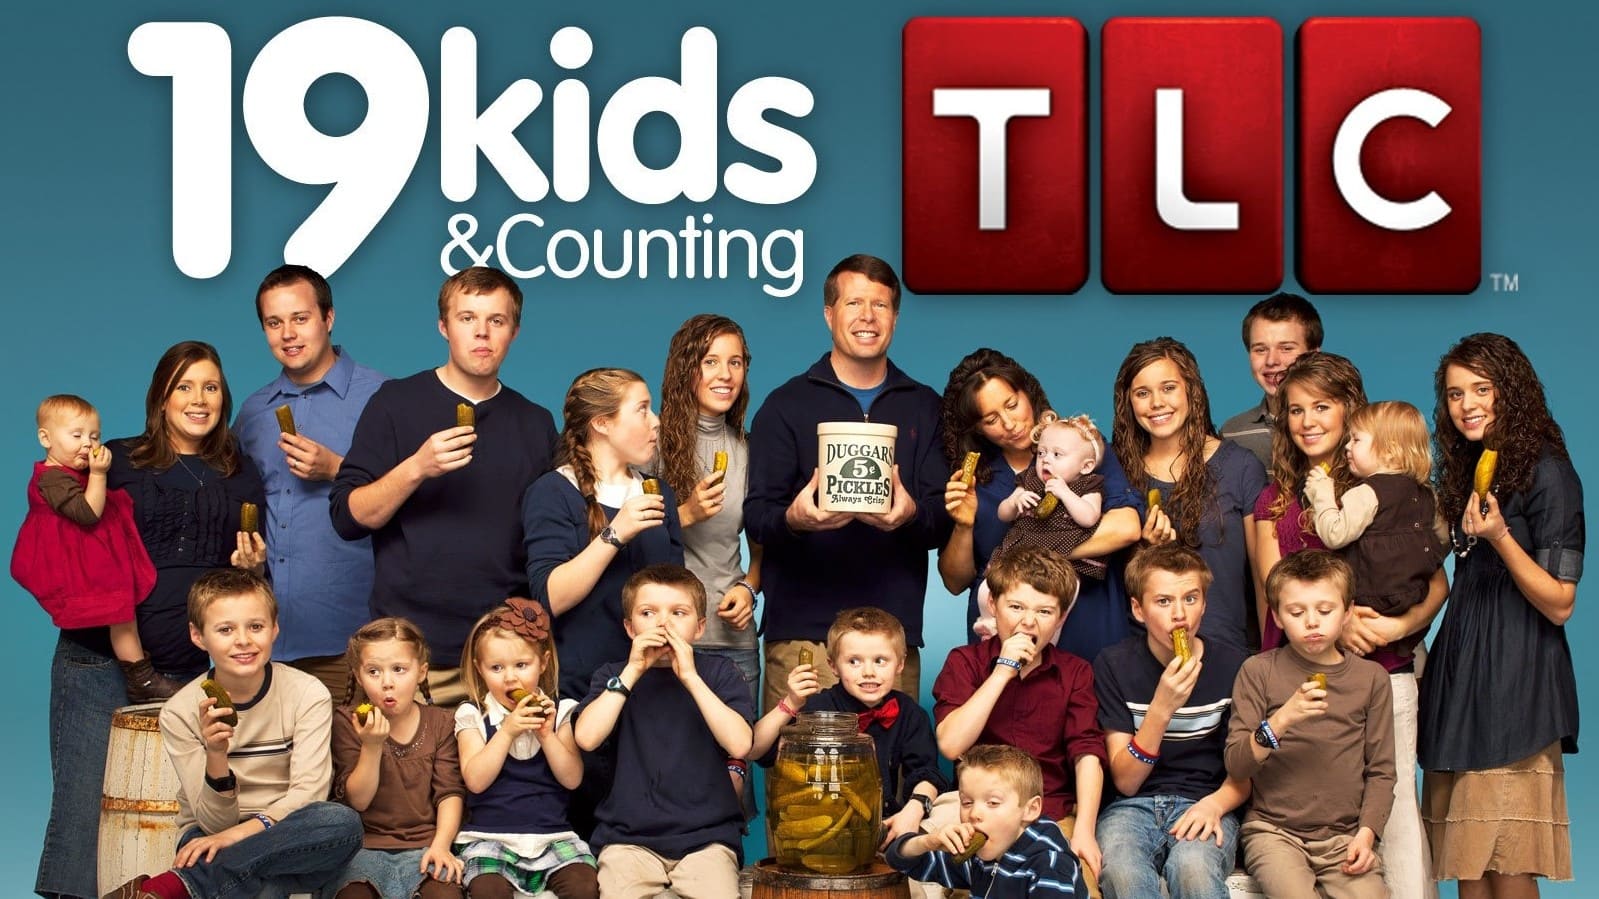 Watch 18 Kids and Counting Online